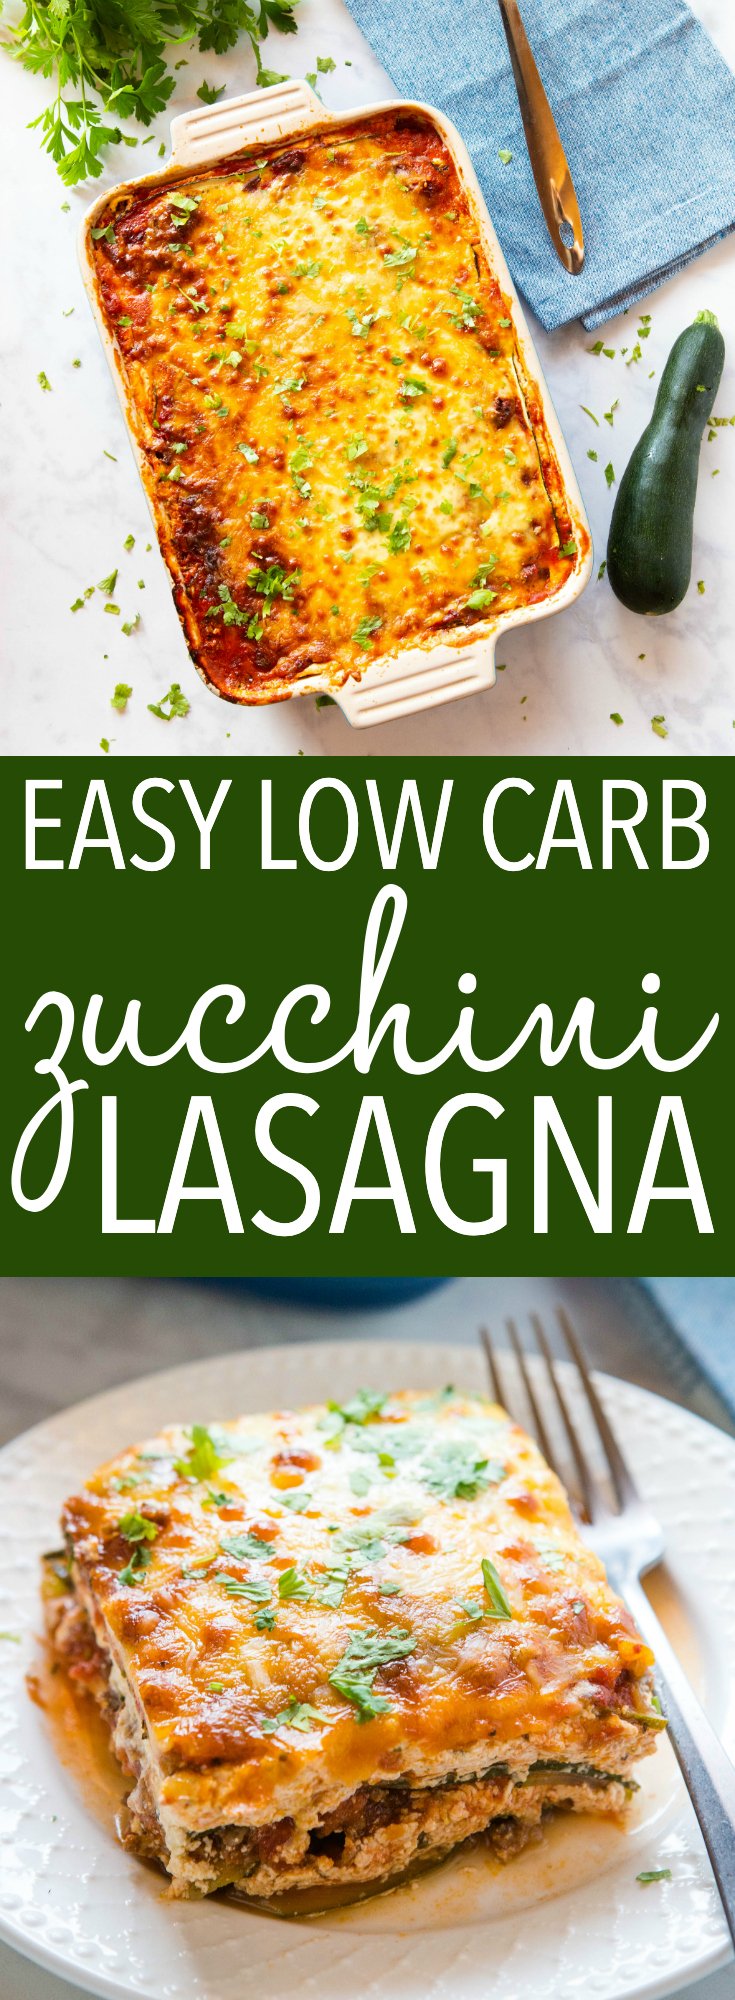 This Low Carb Zucchini Lasagna is the perfect Italian-style comfort food, without the carbs! Flavourful meat sauce, creamy ricotta filling - you won't even miss the noodles! Recipe from thebusbaker.ca! #lowcarb #keto #healthy #weightloss #healthylifestyle #familymeal #mealprep #mealplanning #dinner via @busybakerblog